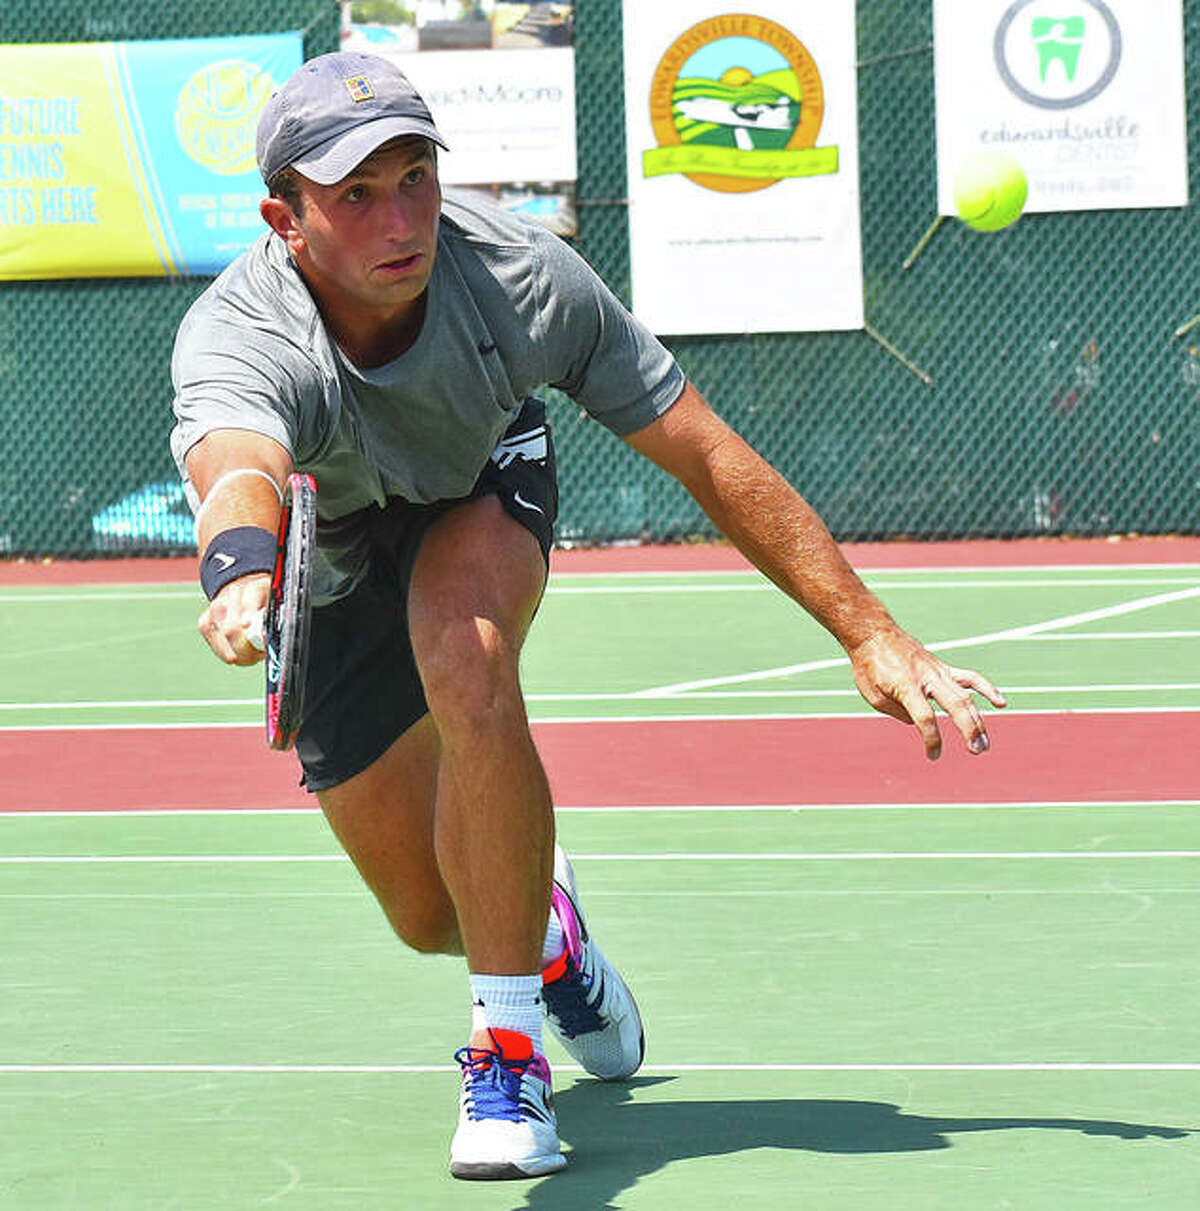 Preston Touliatos hits a shot at the net during his first-round match against Carson Haskins in the qualifying tournament of the Edwardsville Futures.